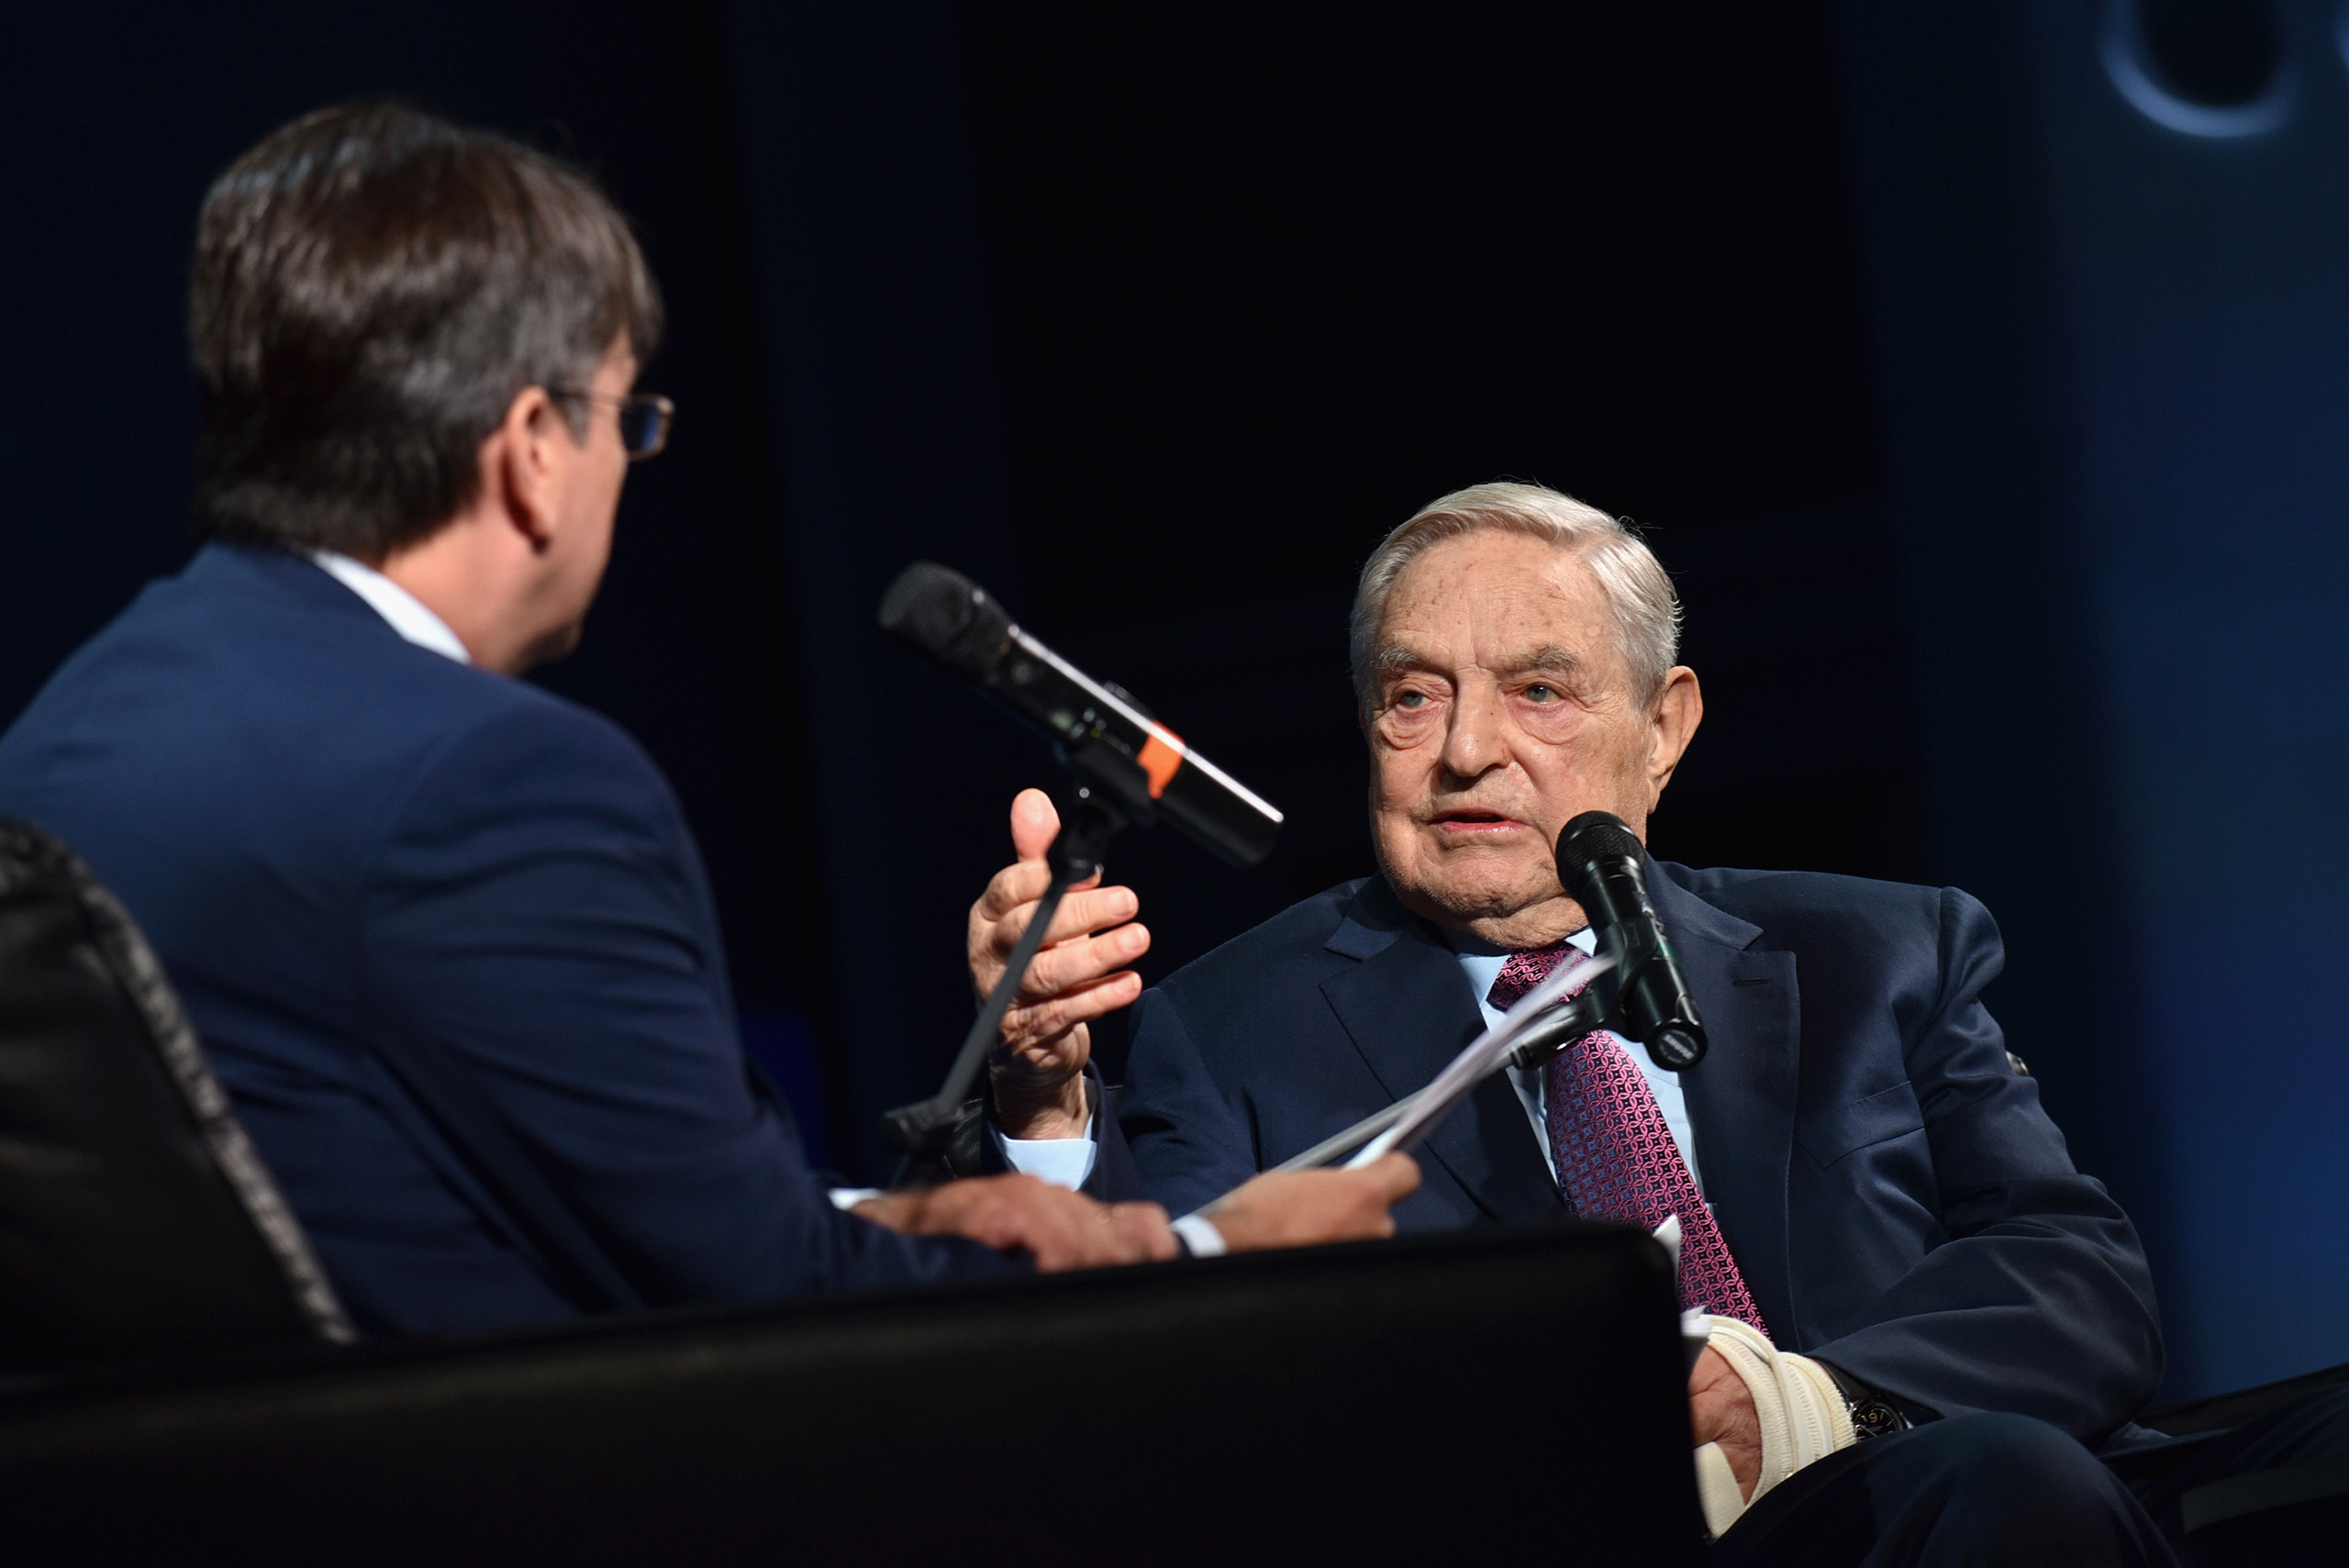 Founder and Chair, Soros Fund Management and the Open Society Foundations George Soros attends 2016 Concordia Summit - Day 2 at Grand Hyatt New York on Sept. 20, 2016. (Bryan Bedder—Concordia Summi/Getty Images)